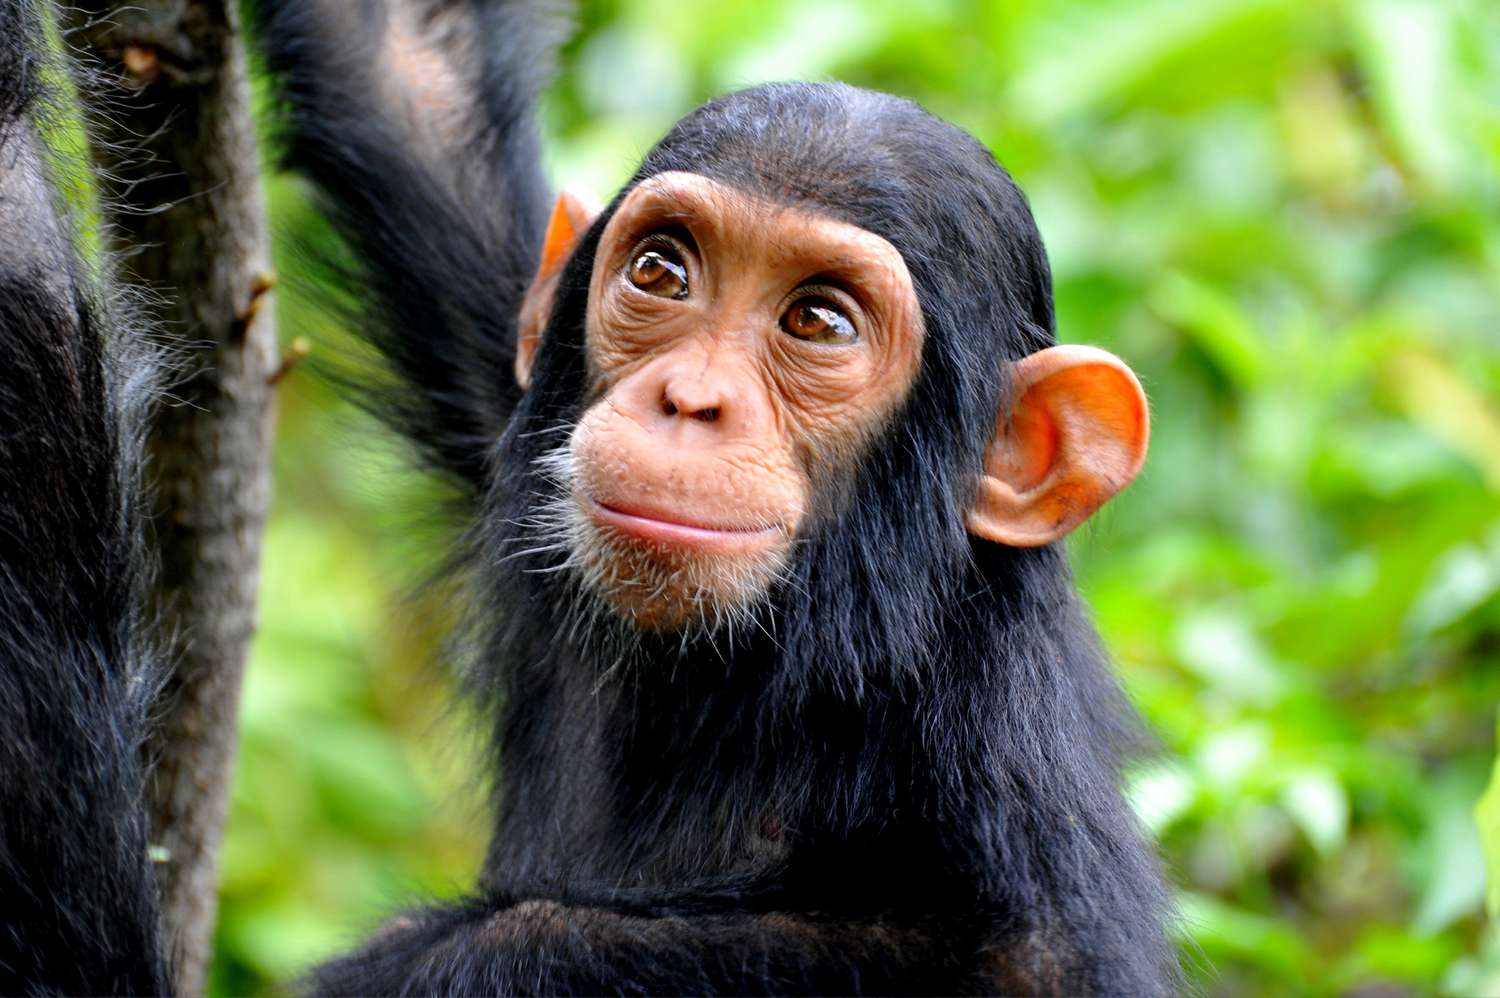 How much do baby chimps cost?